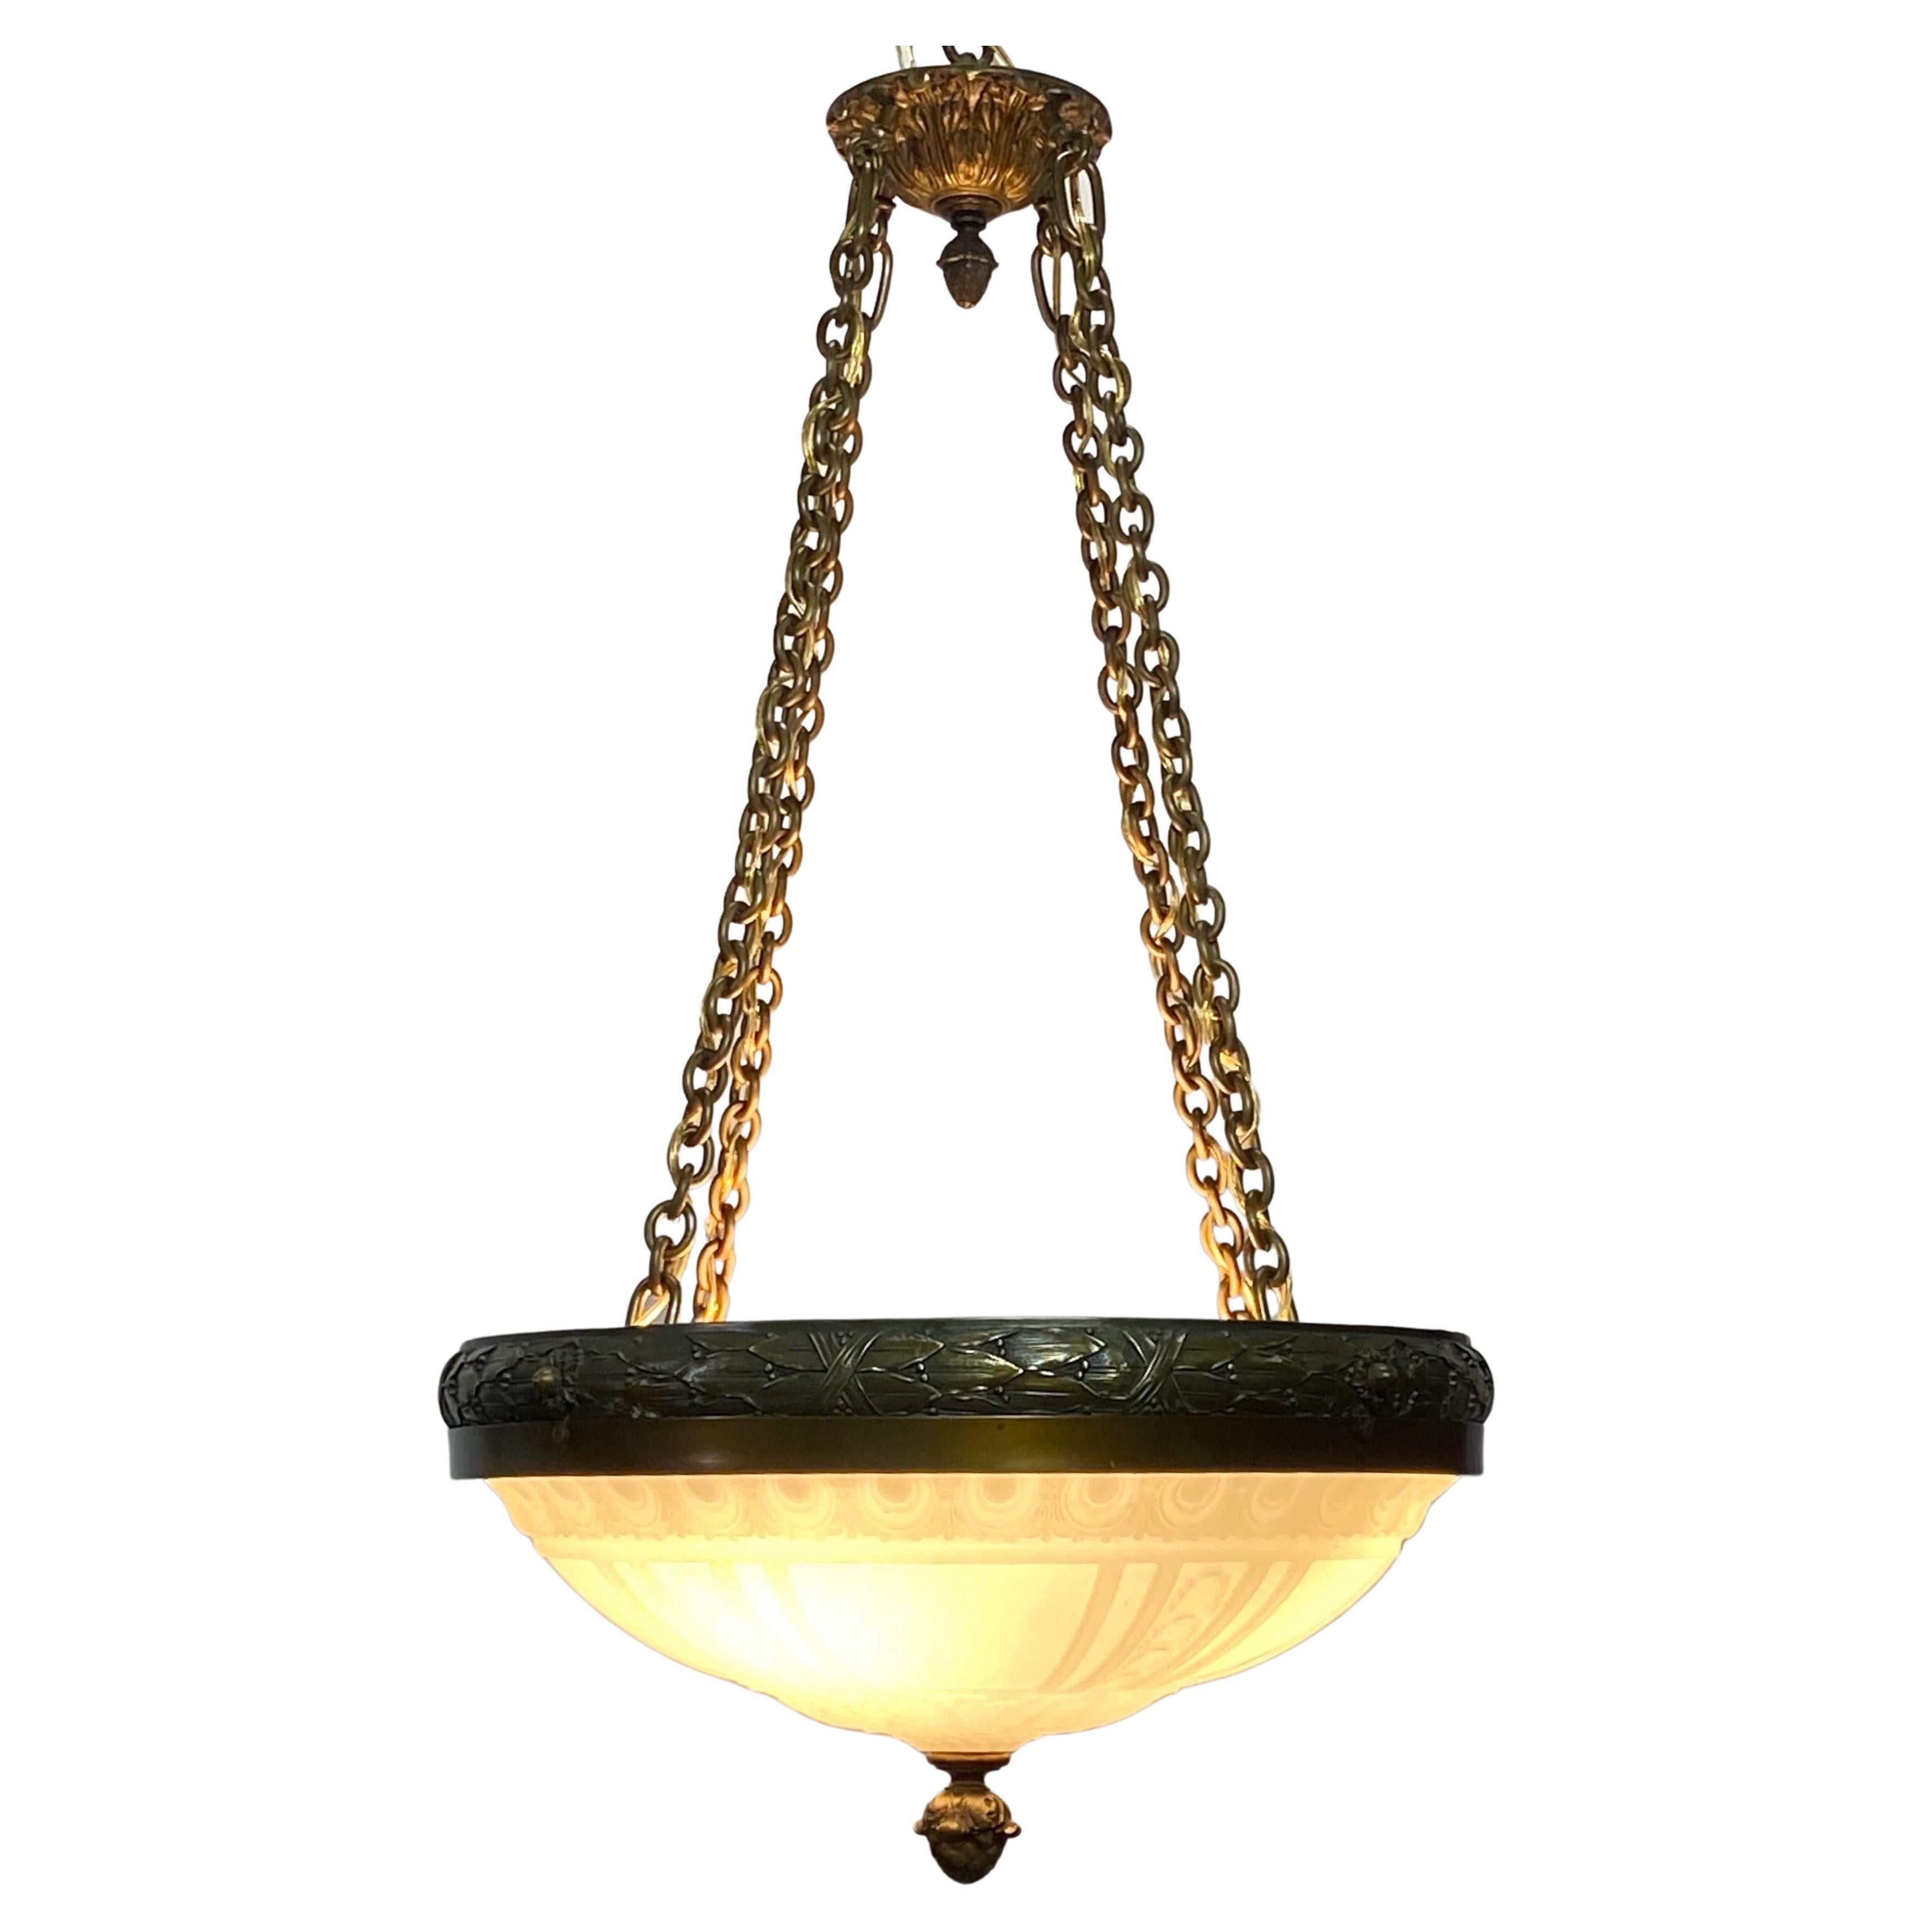 Neoclassical Style Glass and Brass Light Fixture, American circa 1915